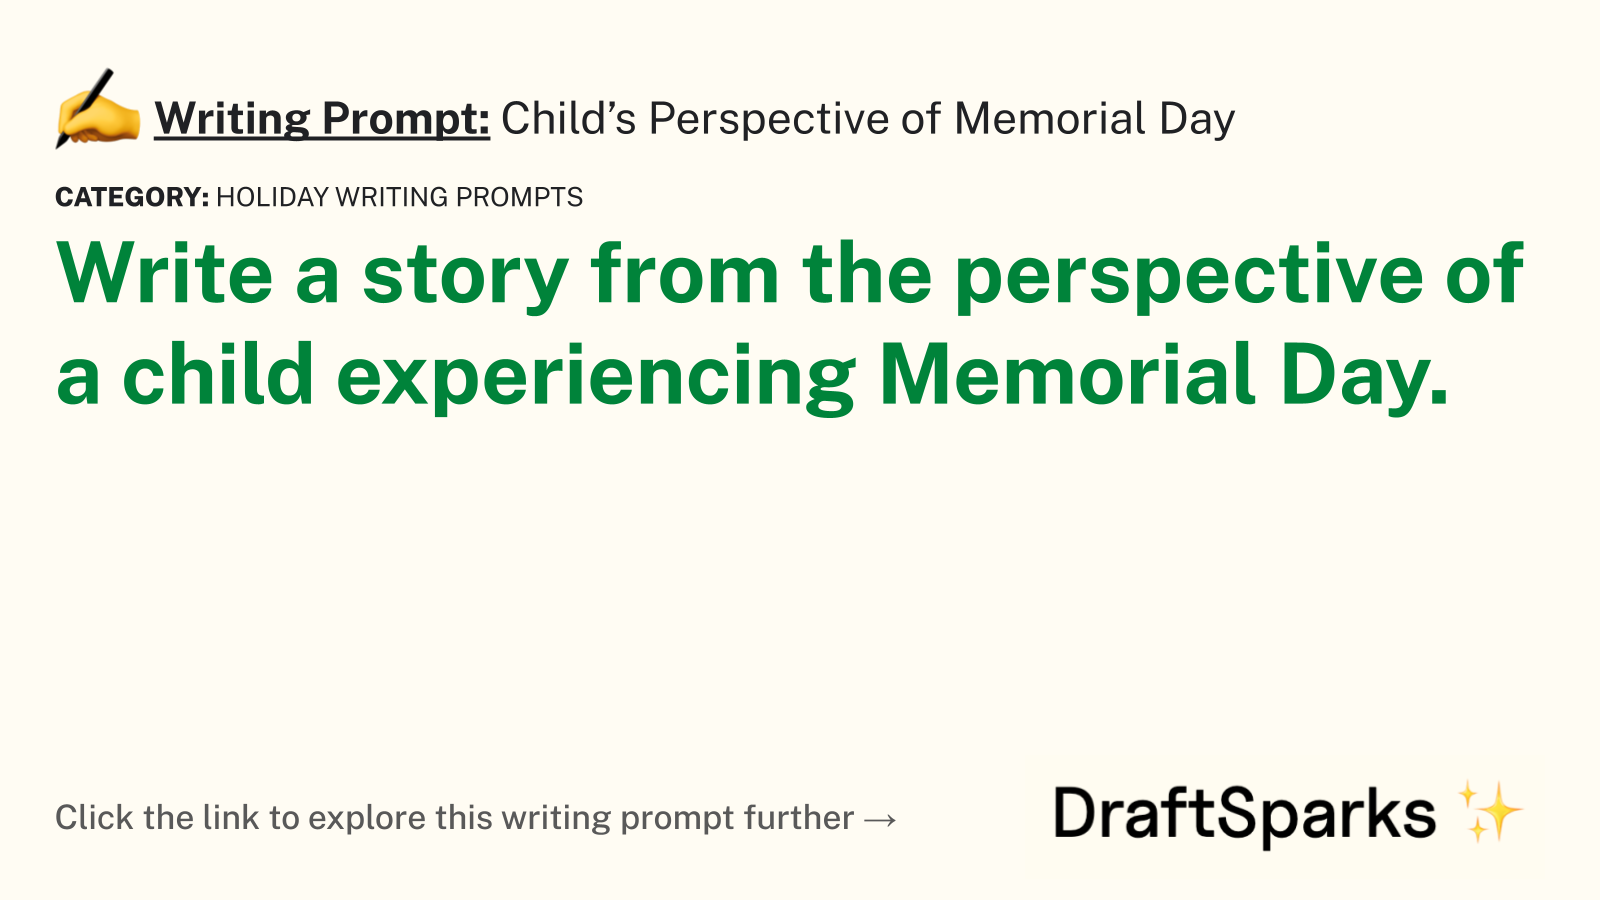 Child’s Perspective of Memorial Day